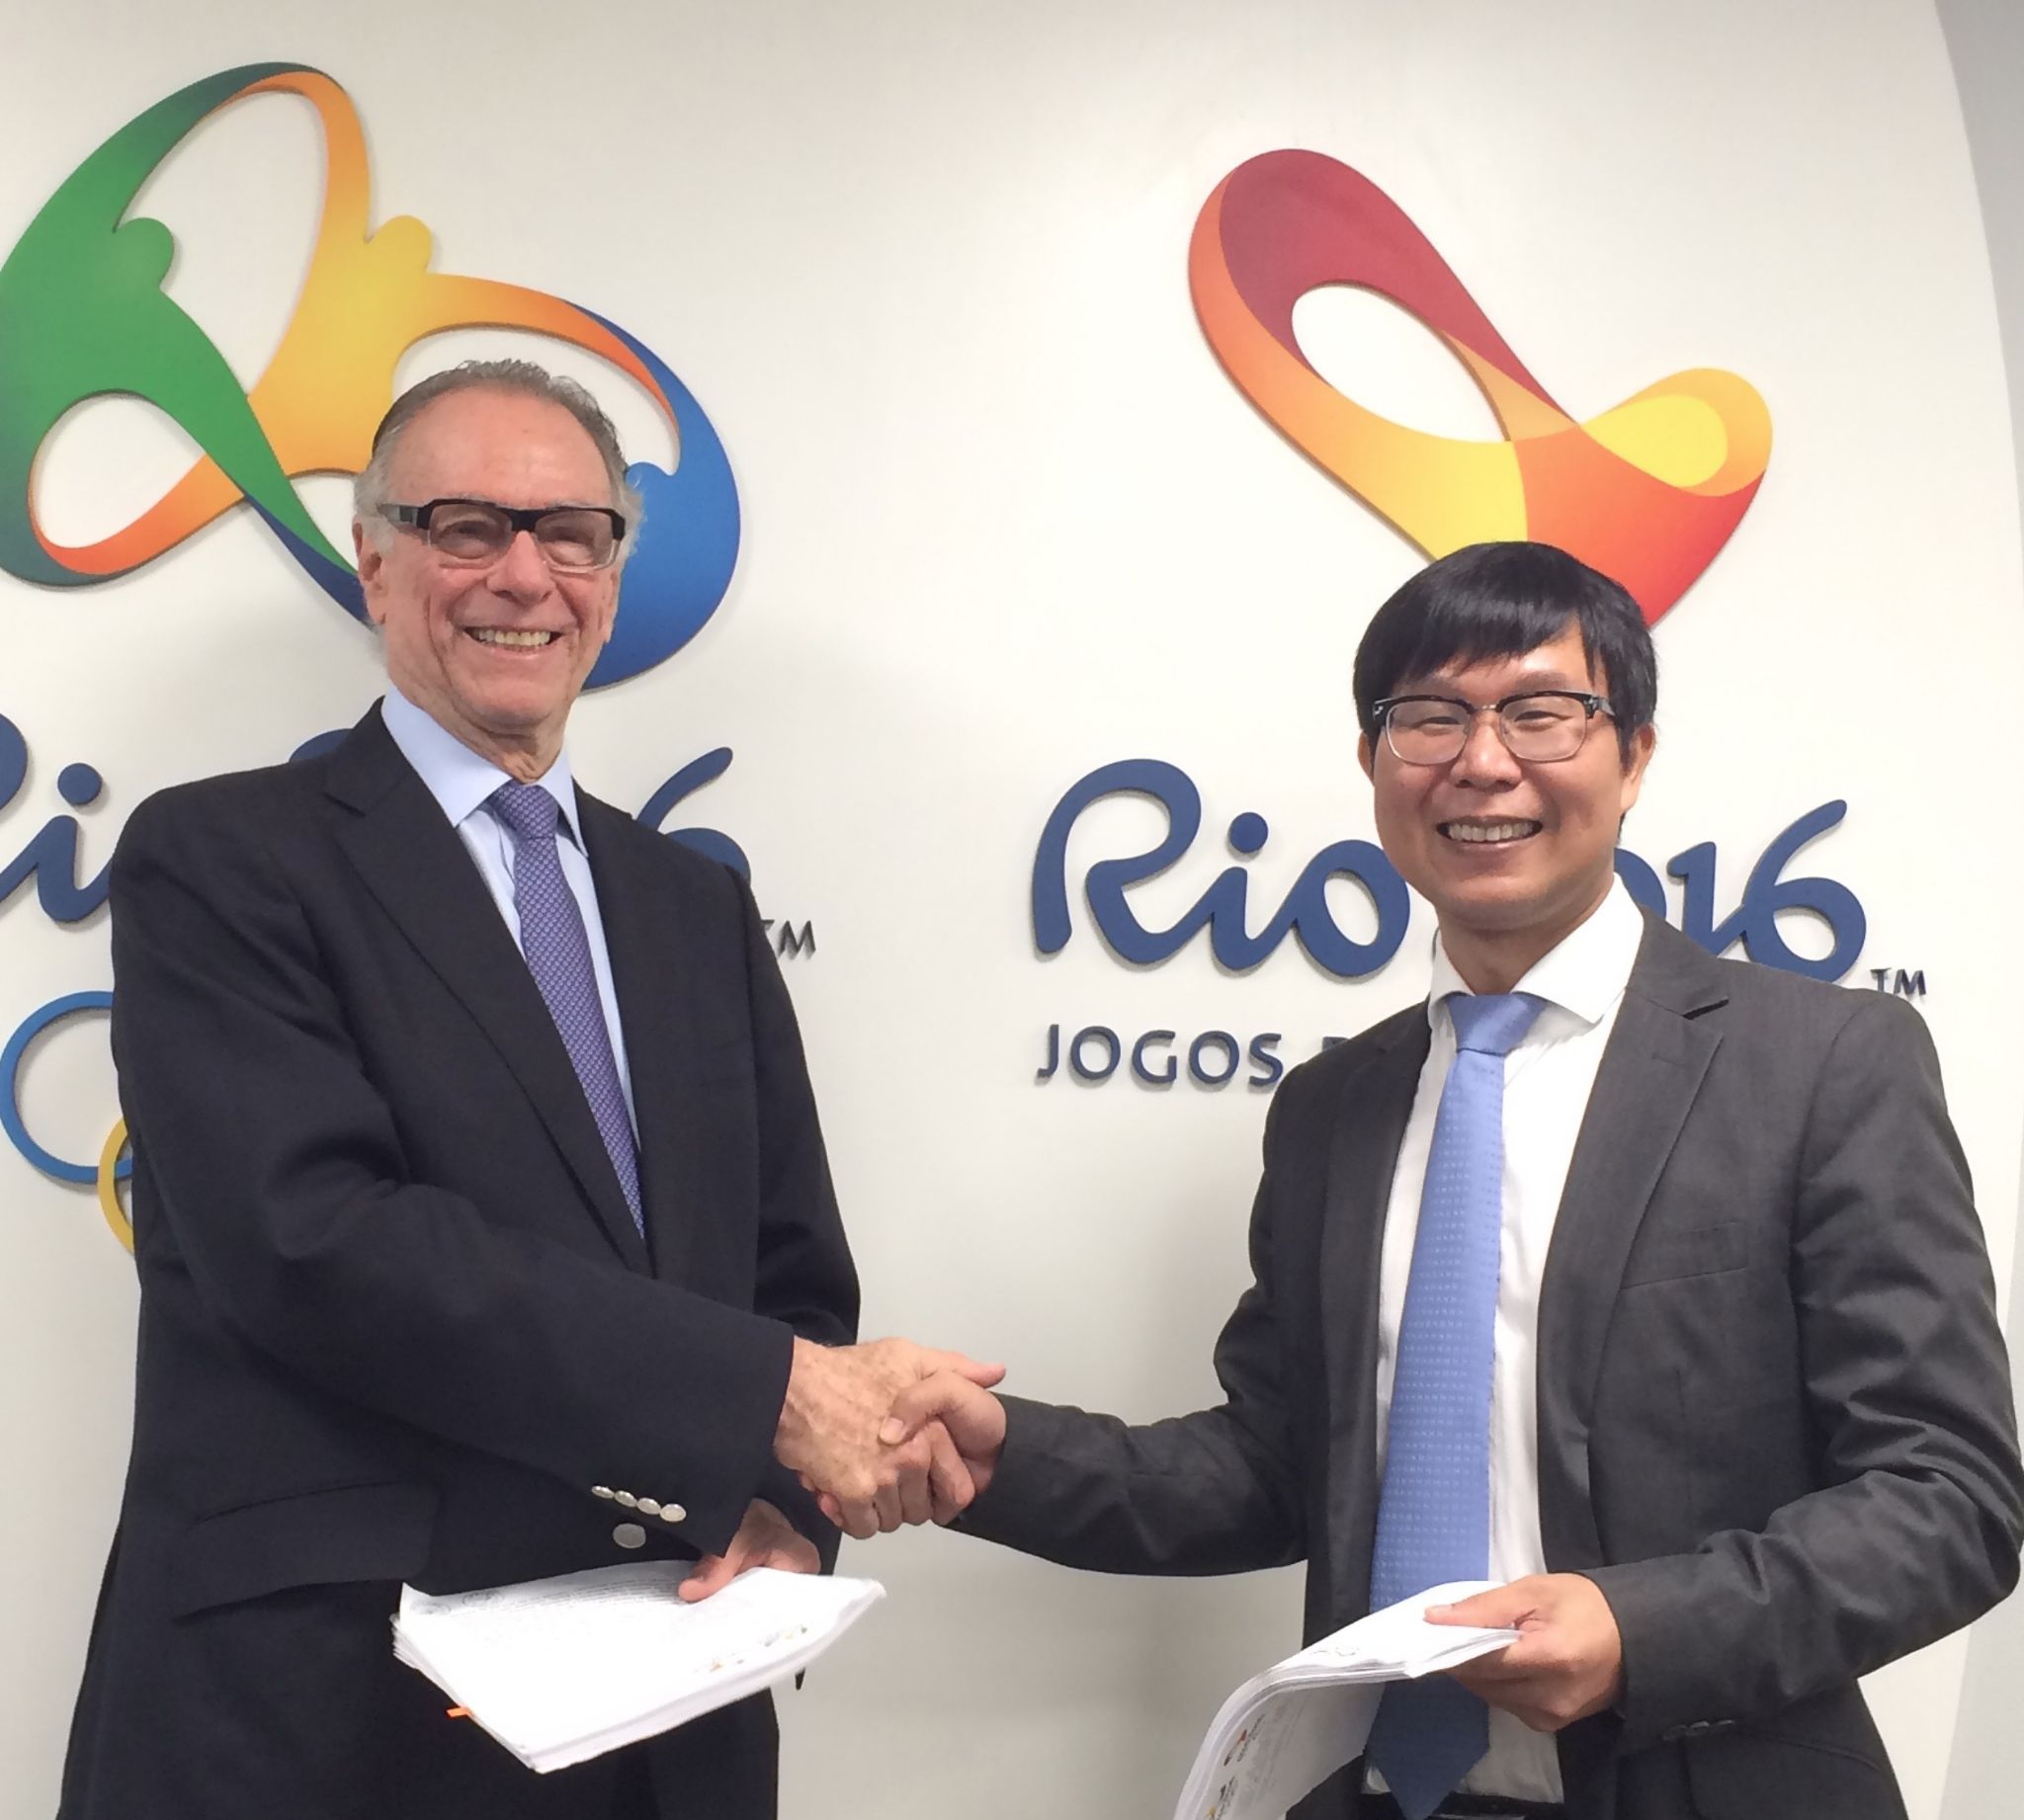 Gree is a supplier to Rio Olympic Games